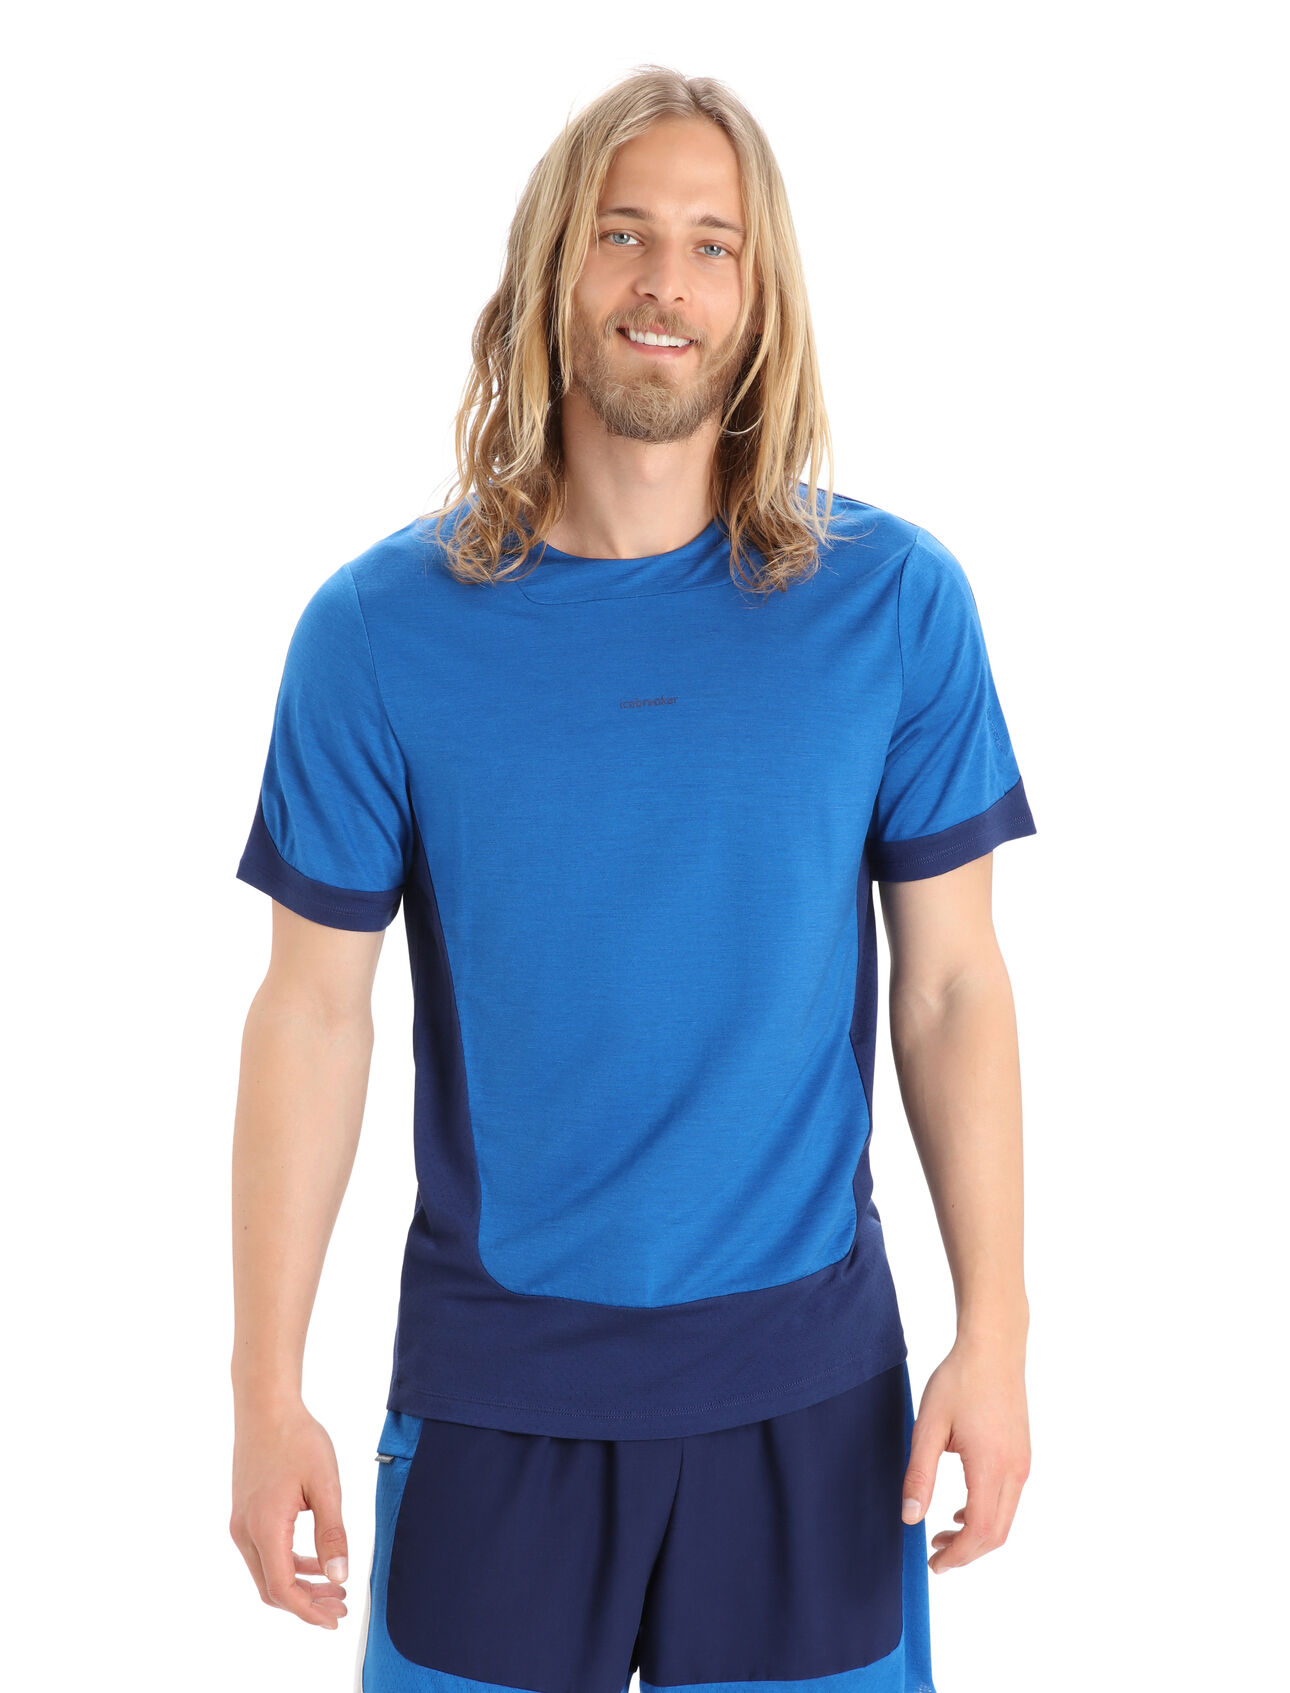 Mens ZoneKnit™ Merino Short Sleeve Tee Our most breathable and lightweight tee designed for running, biking and other high exertion pursuits, the ZoneKnit™ Short Sleeve Tee combines our Cool-Lite™ jersey fabric with strategic panels of eyelet mesh for enhanced airflow.